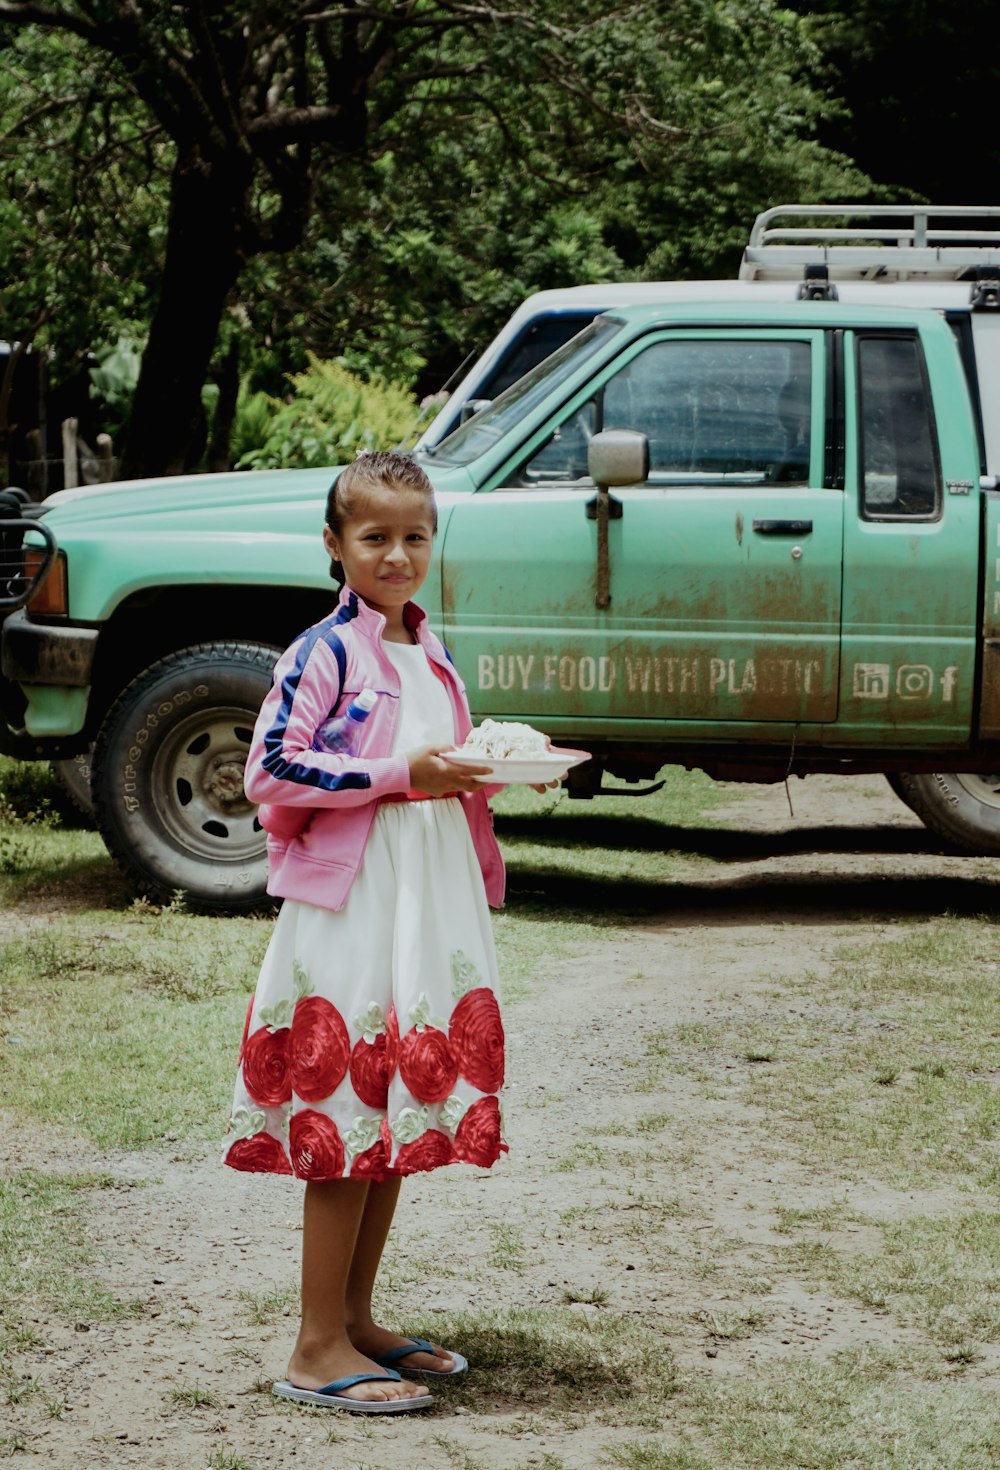 a young girl holding a plate of food in front of a truck